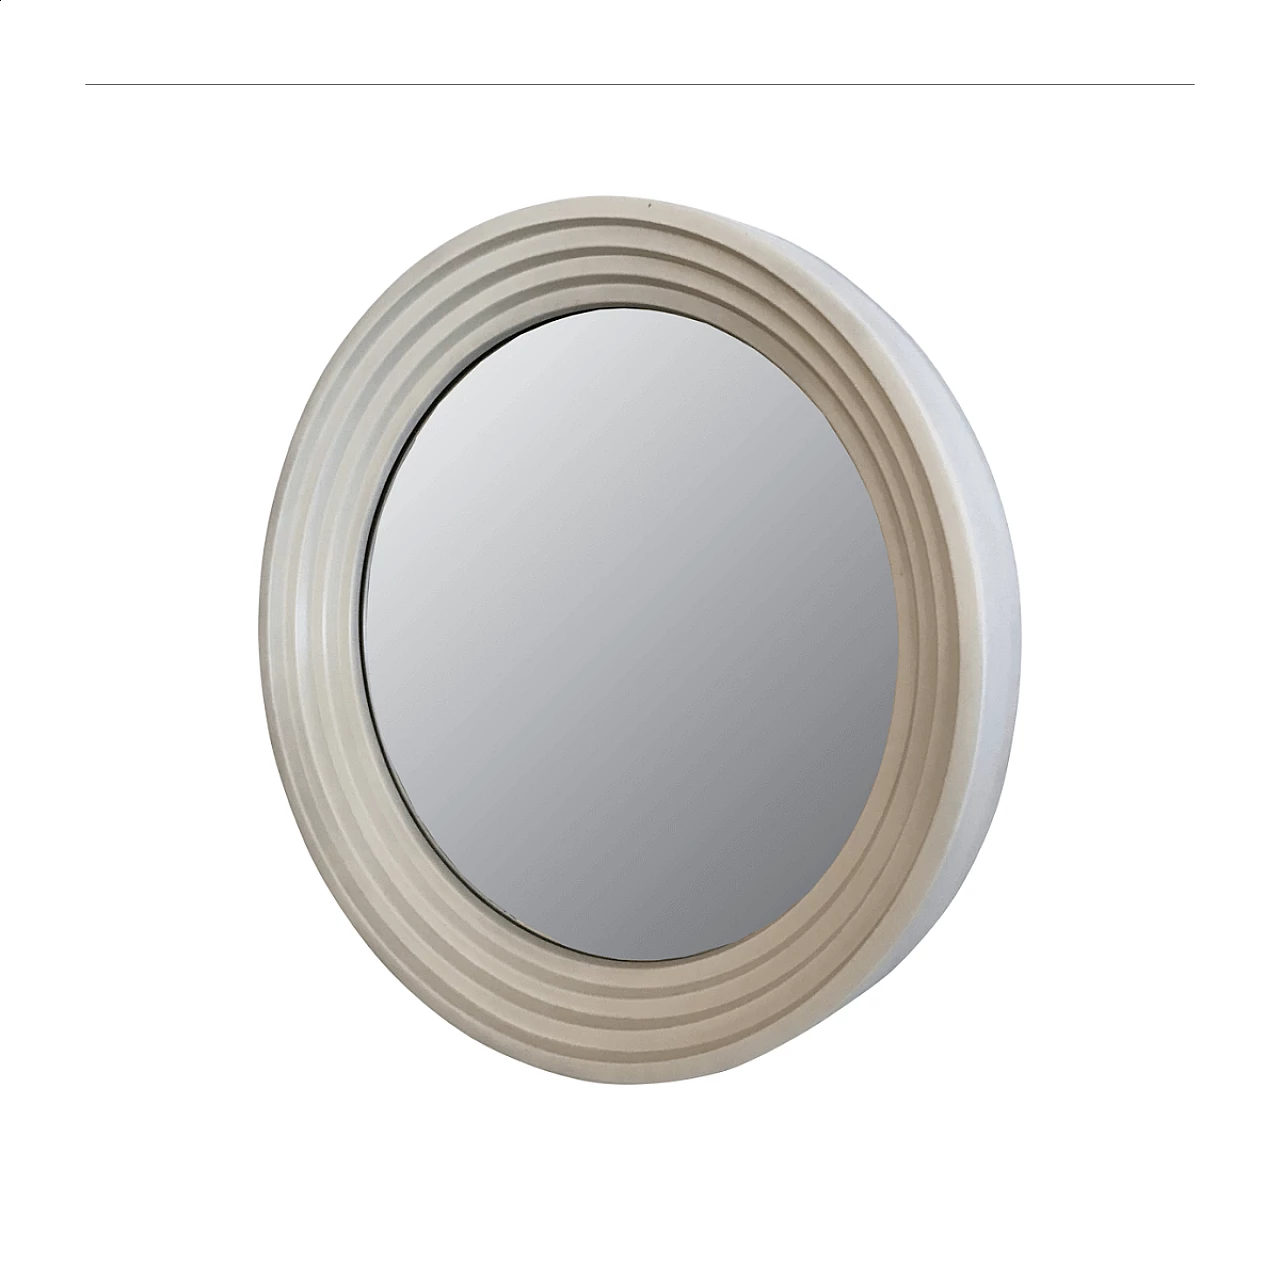 White round mirror, Memphis inspired style from the 70's 1060334